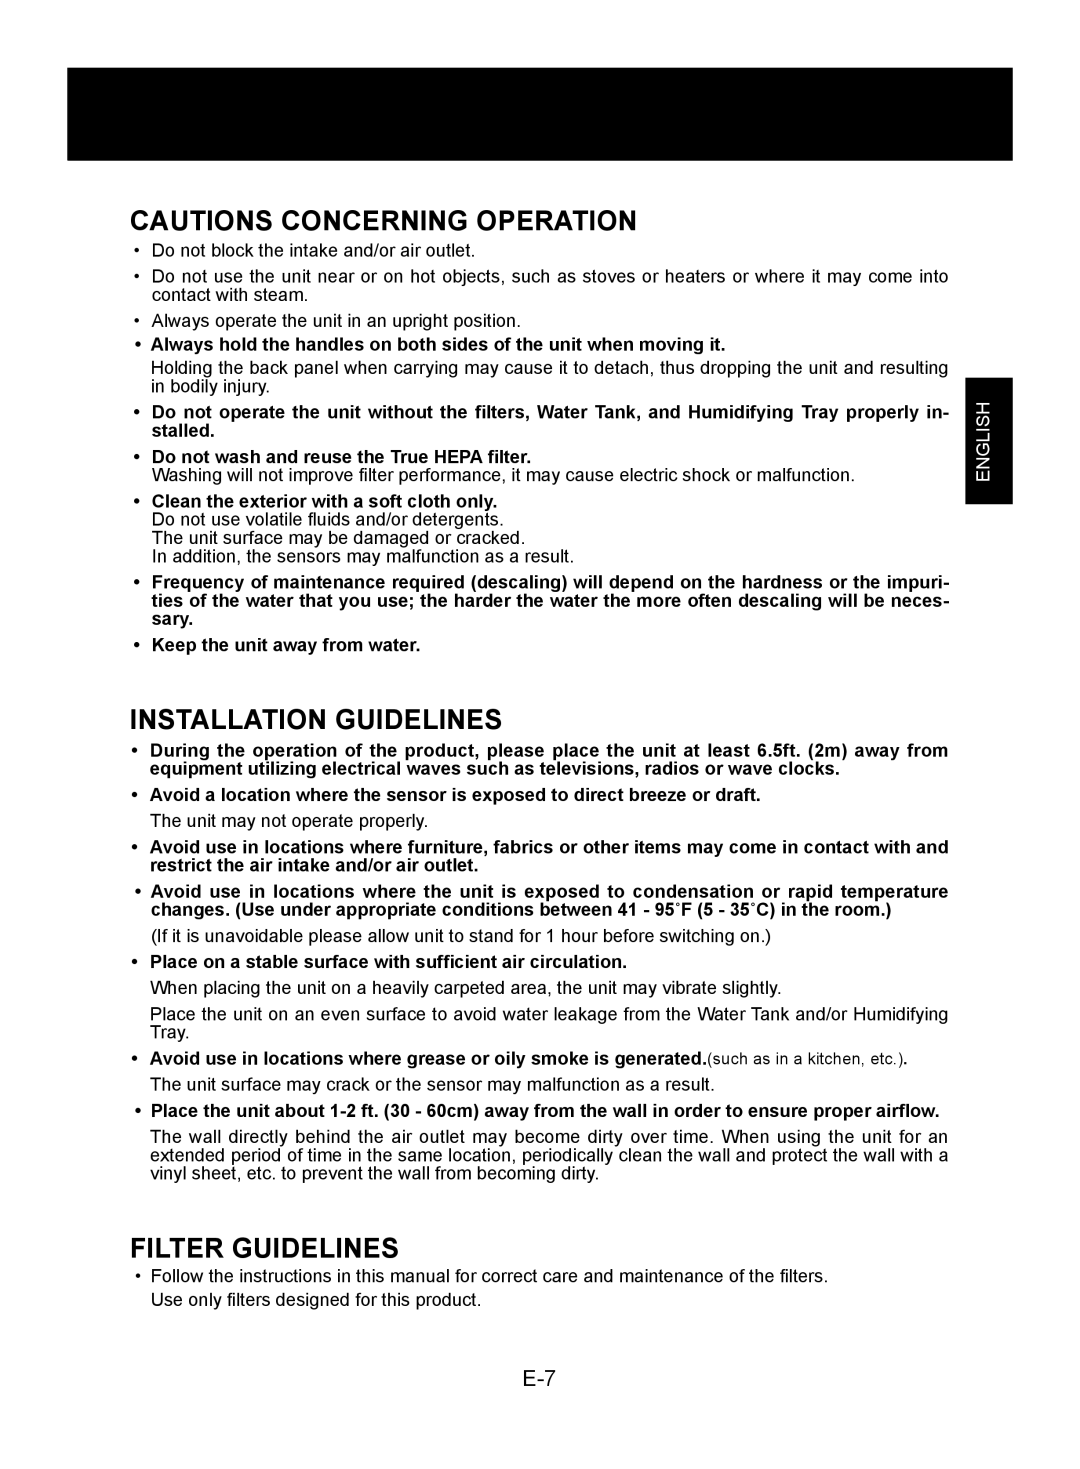 Sharp KC-850U operation manual Cautions Concerning Operation, Installation Guidelines, Filter Guidelines, English 